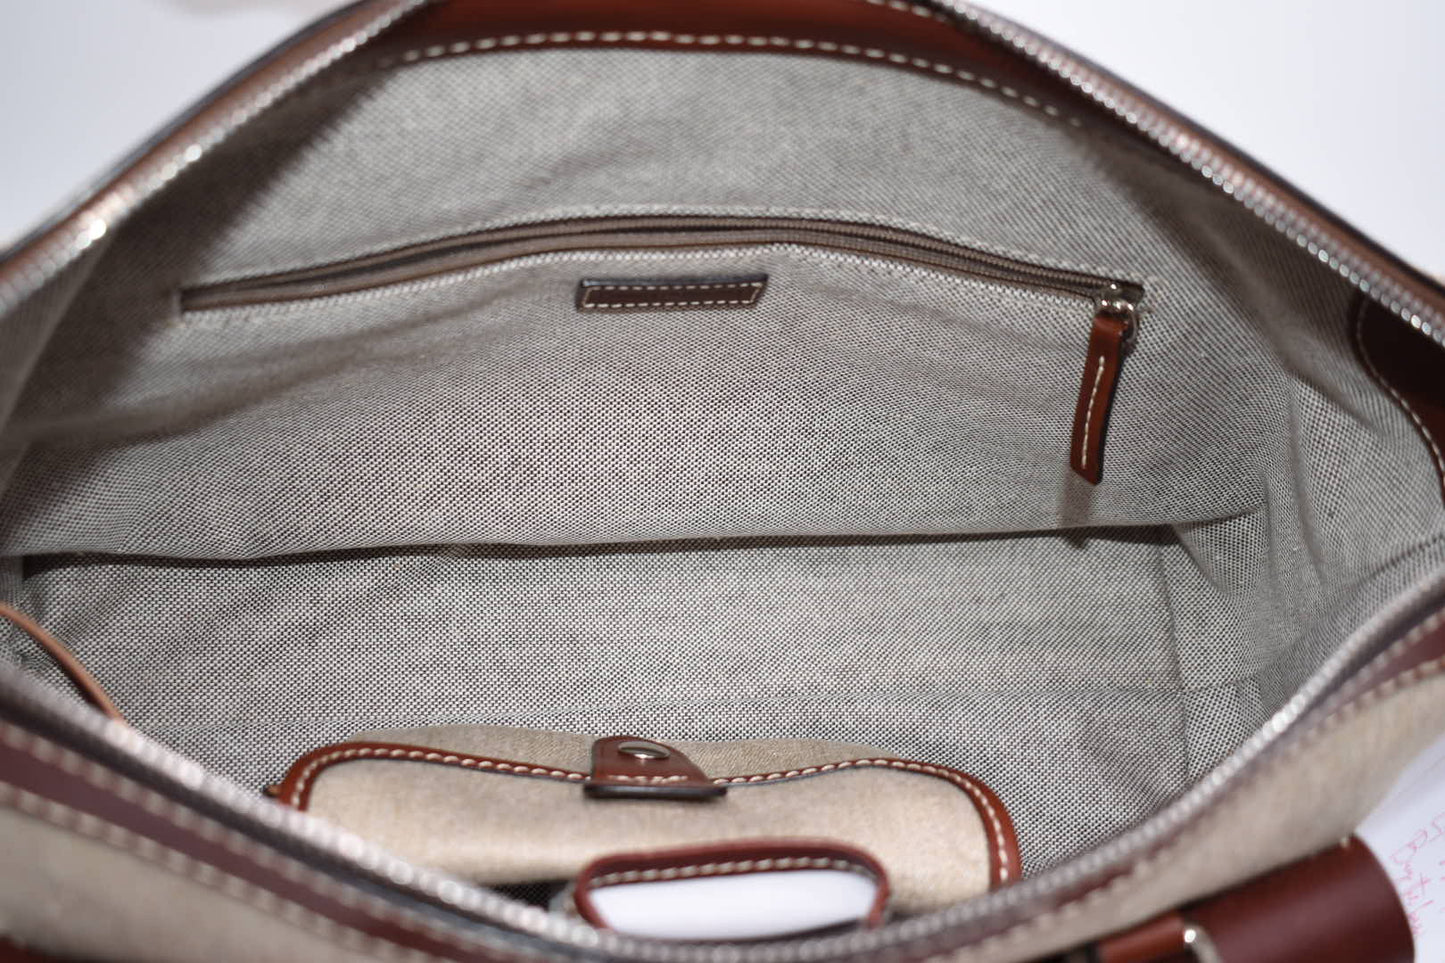 Dooney & Bourke Signature Double Pocket Satchel Bag with Matching Pouch